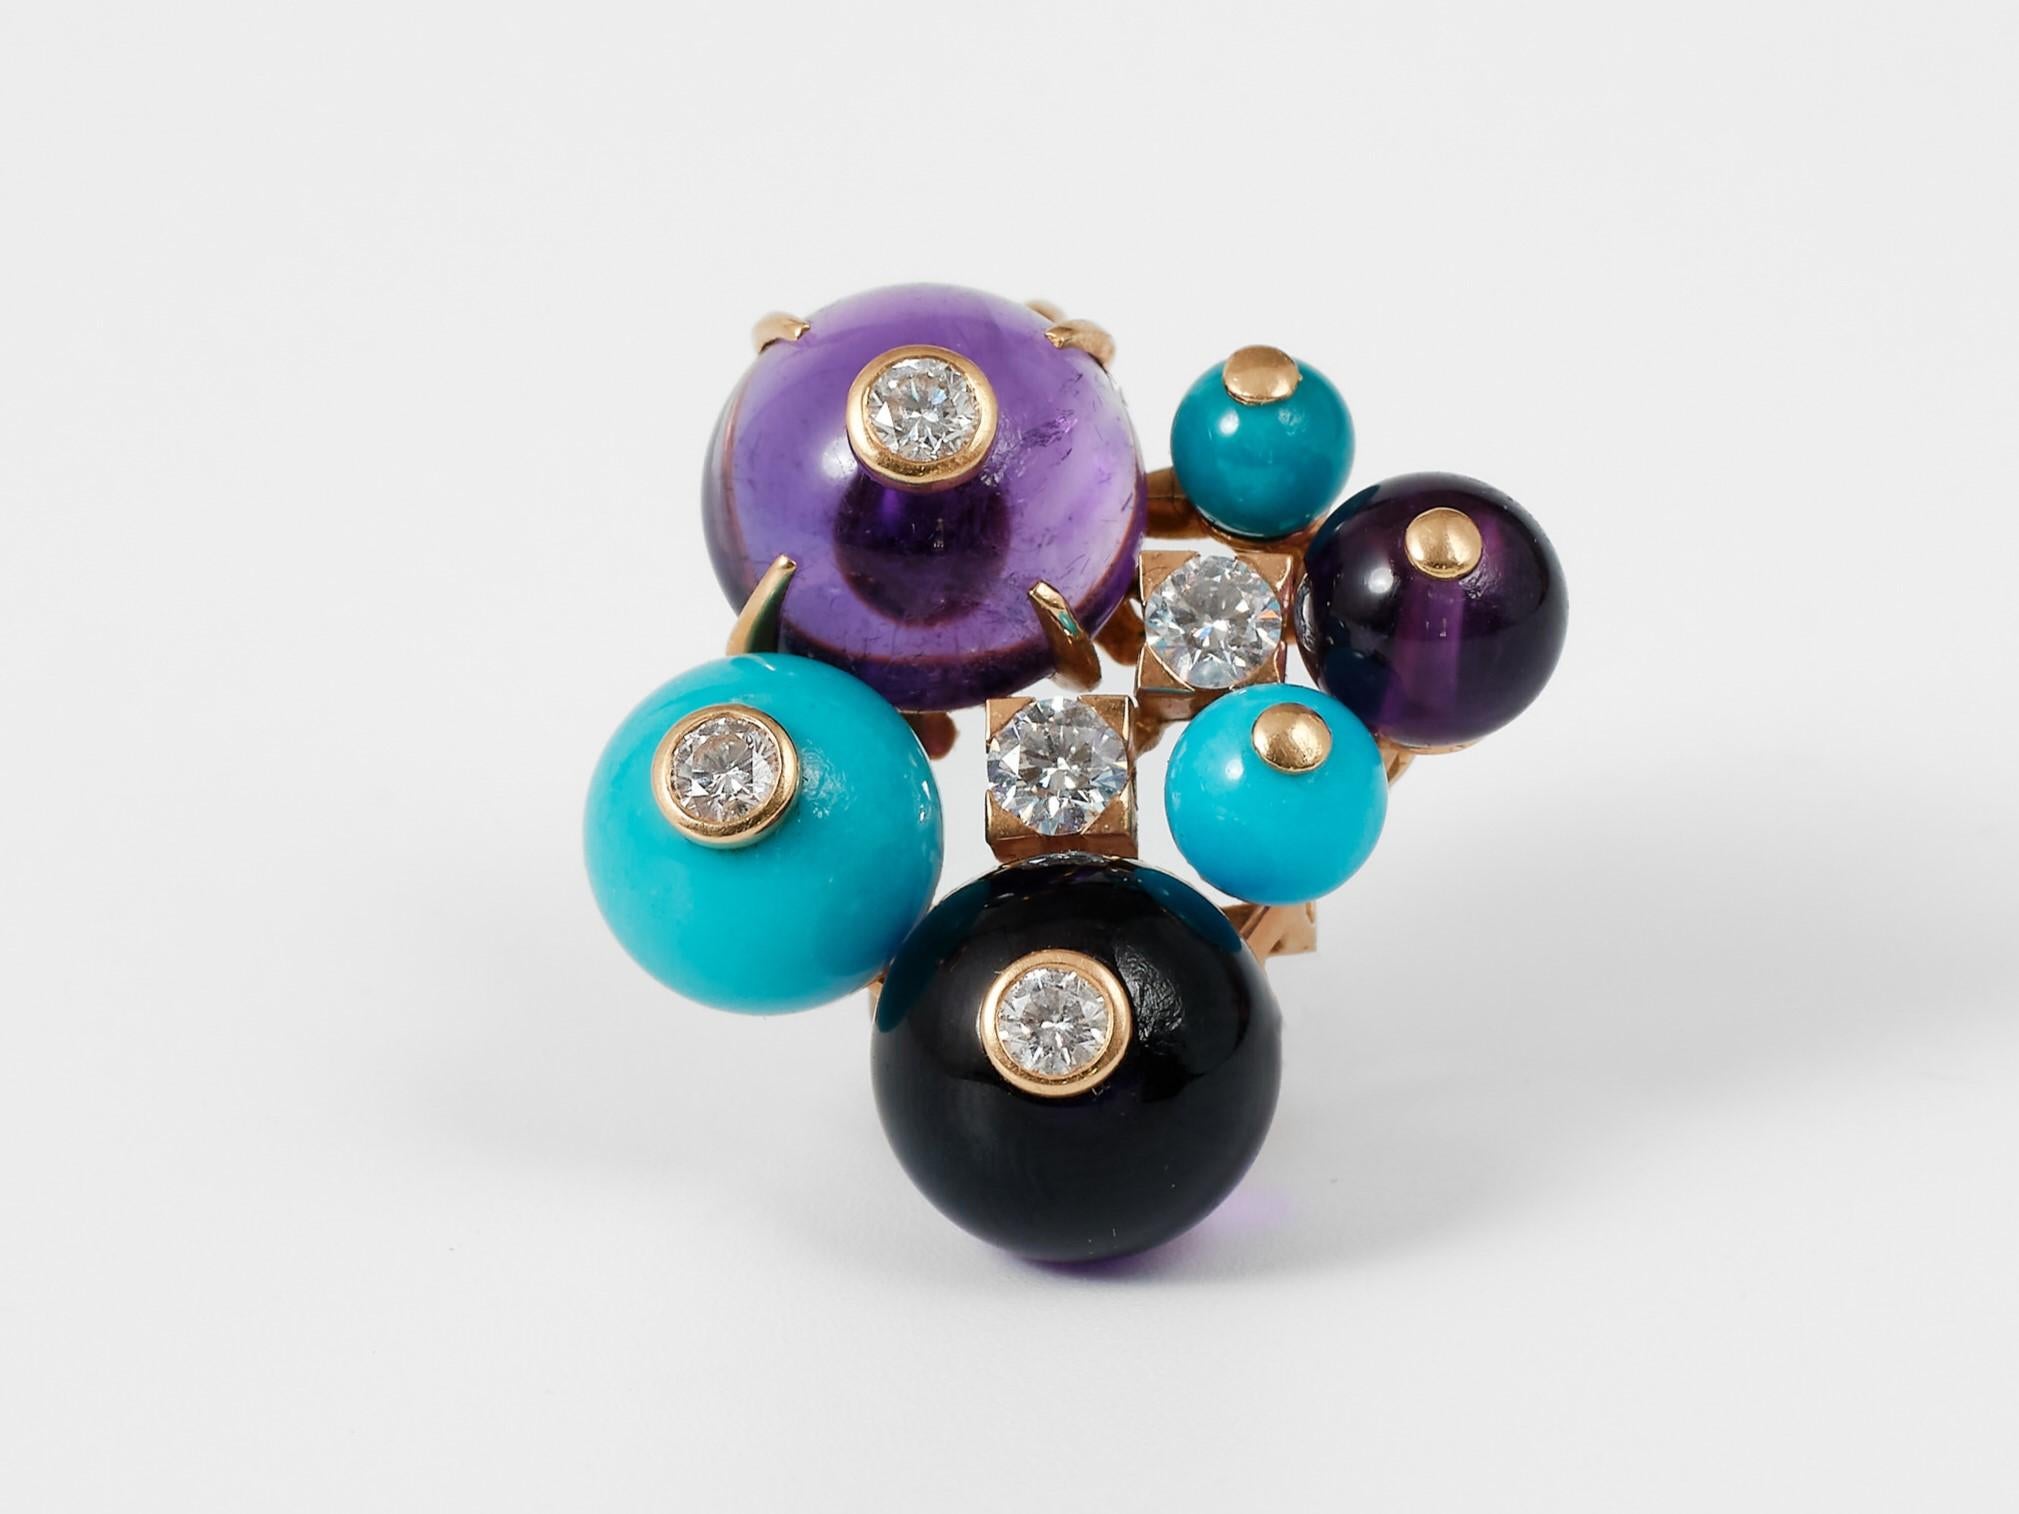 Cartier ‘Délices de Goa' pendant decorated with turquoises and amethysts three of which are enriched with brilliant cut diamonds. 

The Cartier's Les Delices de Goa collection was released in the early 2000s and became an instant classic. The